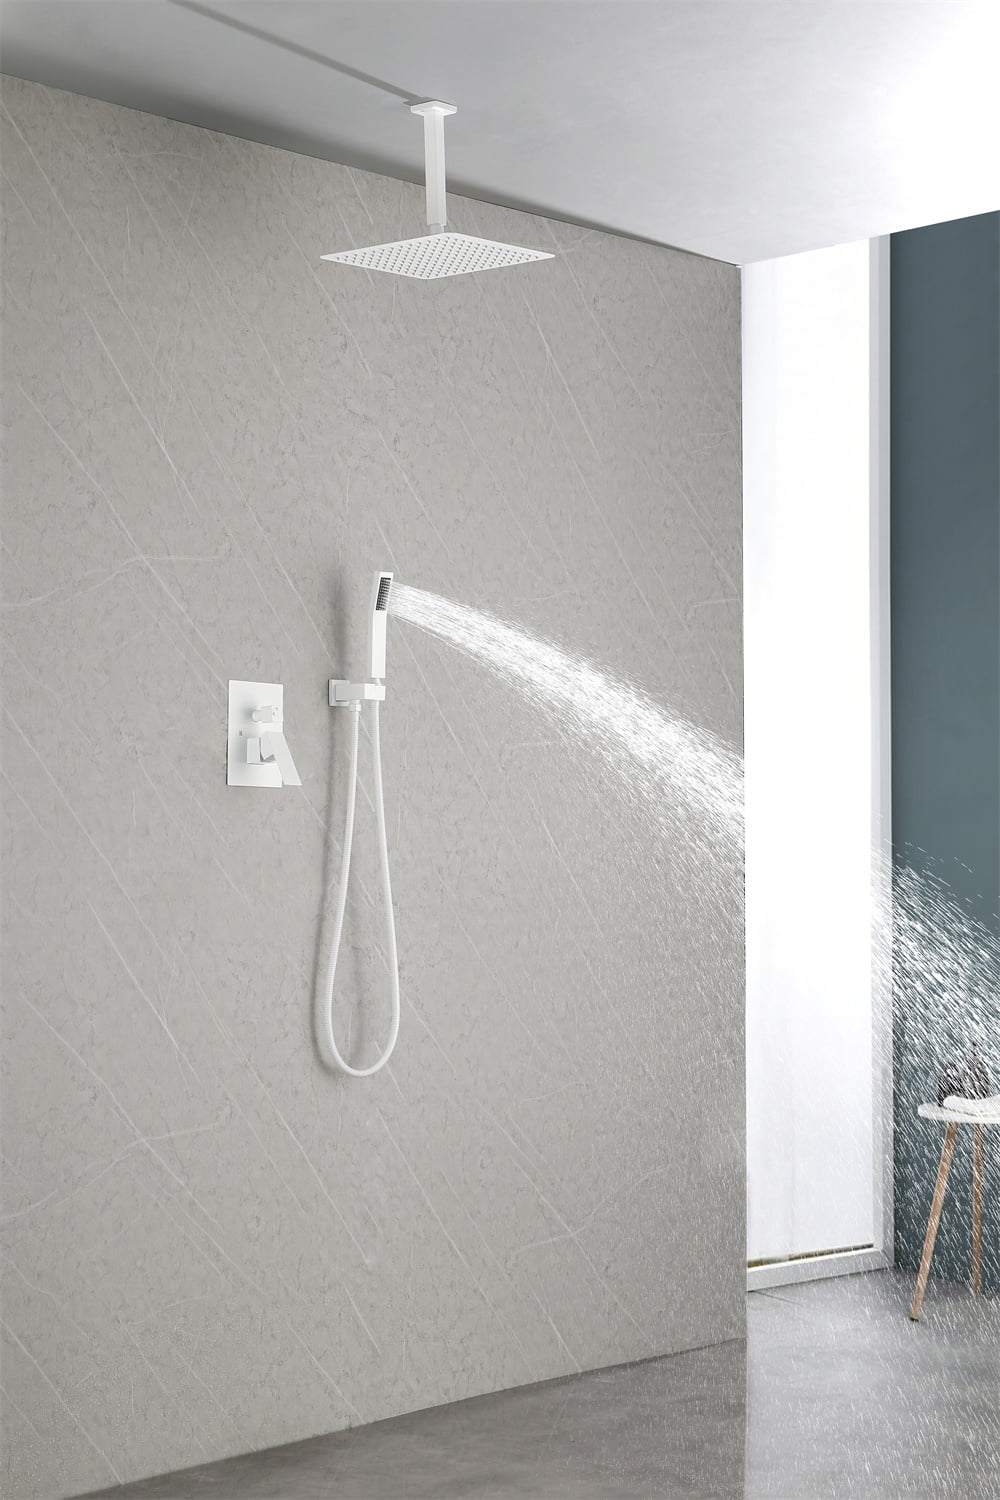 Dropship 10 Inches Wall Mounted Shower With High Pressure Rain Shower Head  And 5-Function Handheld Shower Head to Sell Online at a Lower Price